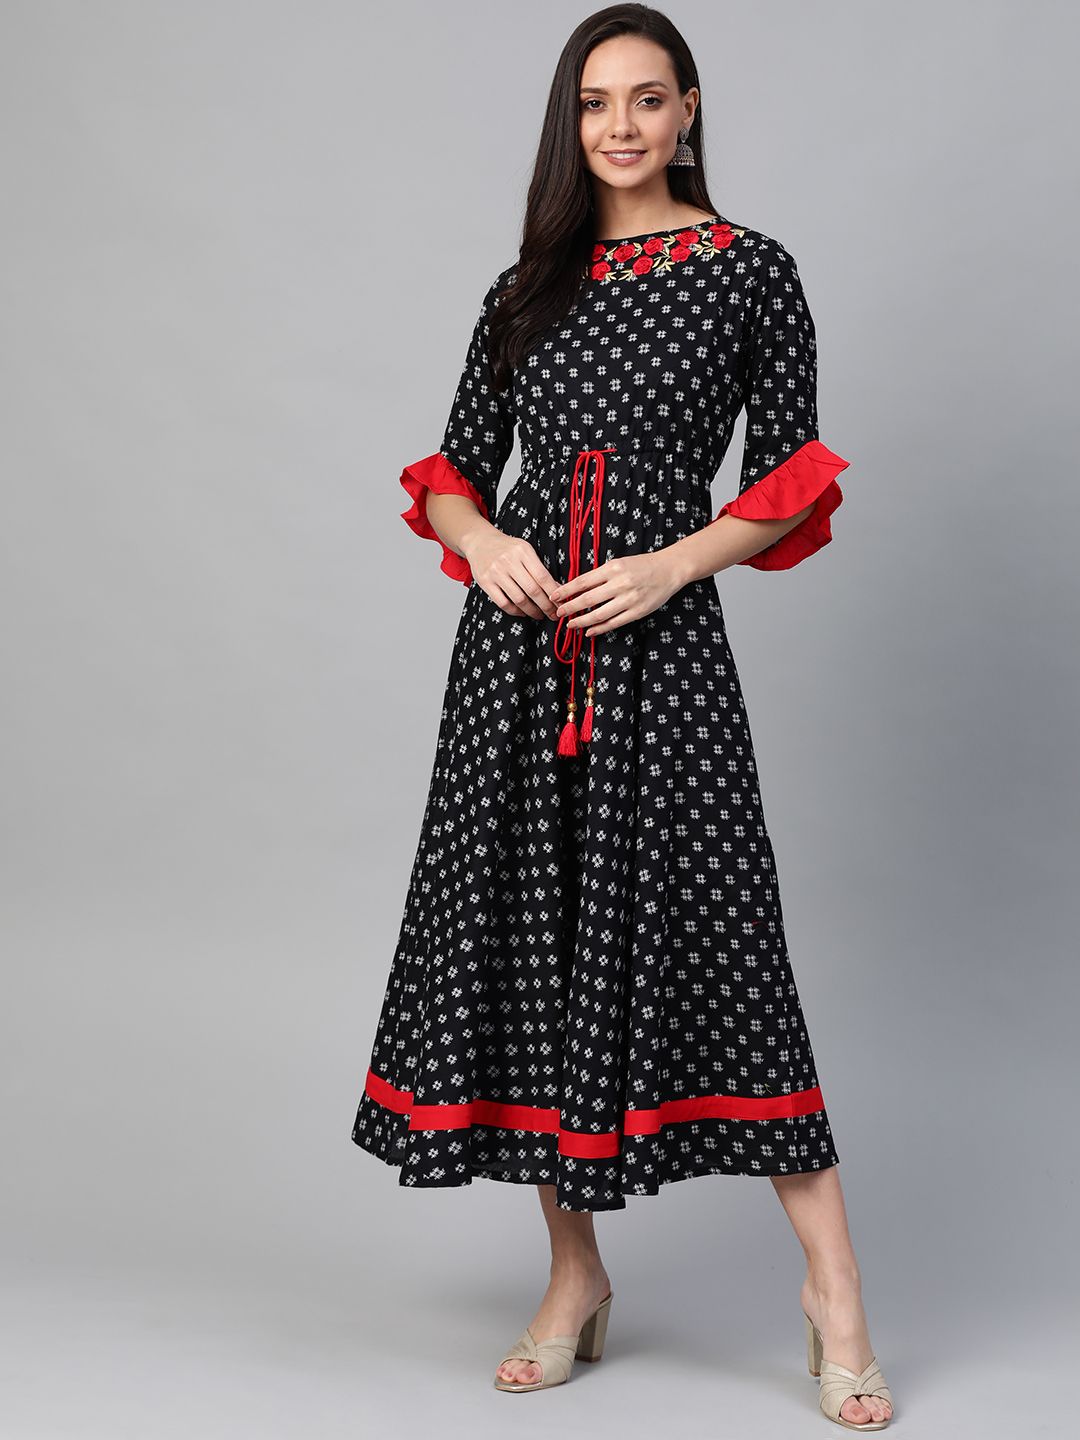 YASH GALLERY Women Black & Off-White Printed A-Line Dress Price in India